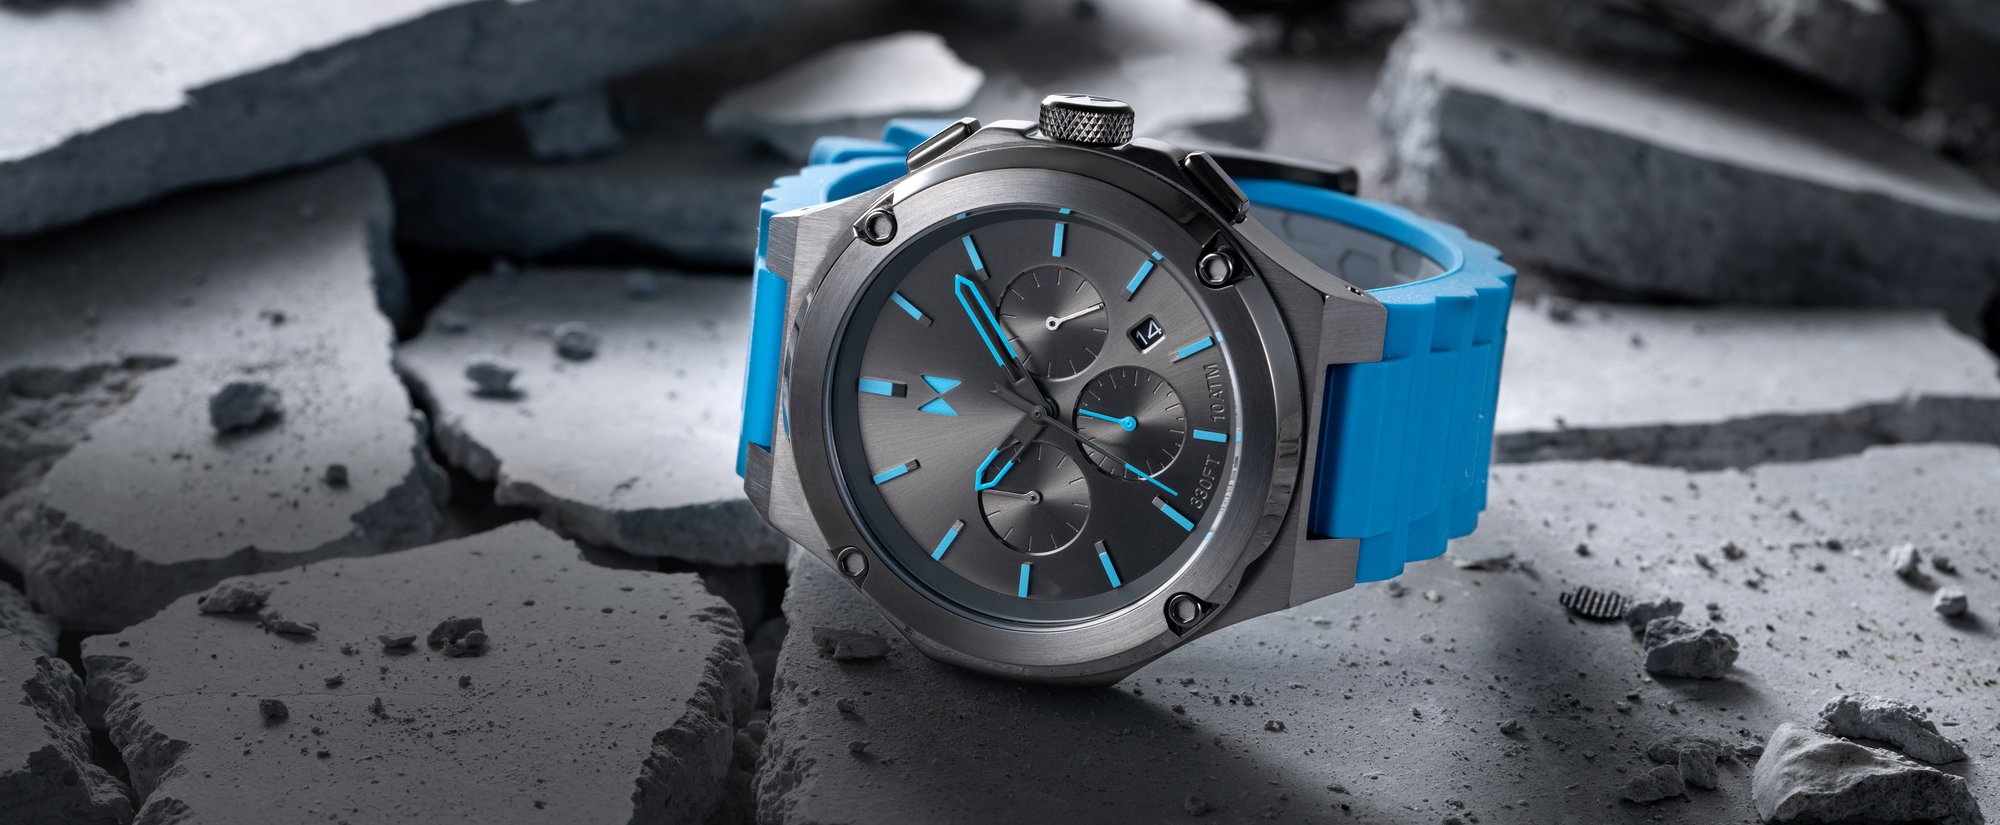 MVMT watch with blue strap and black face lying on cracked concrete